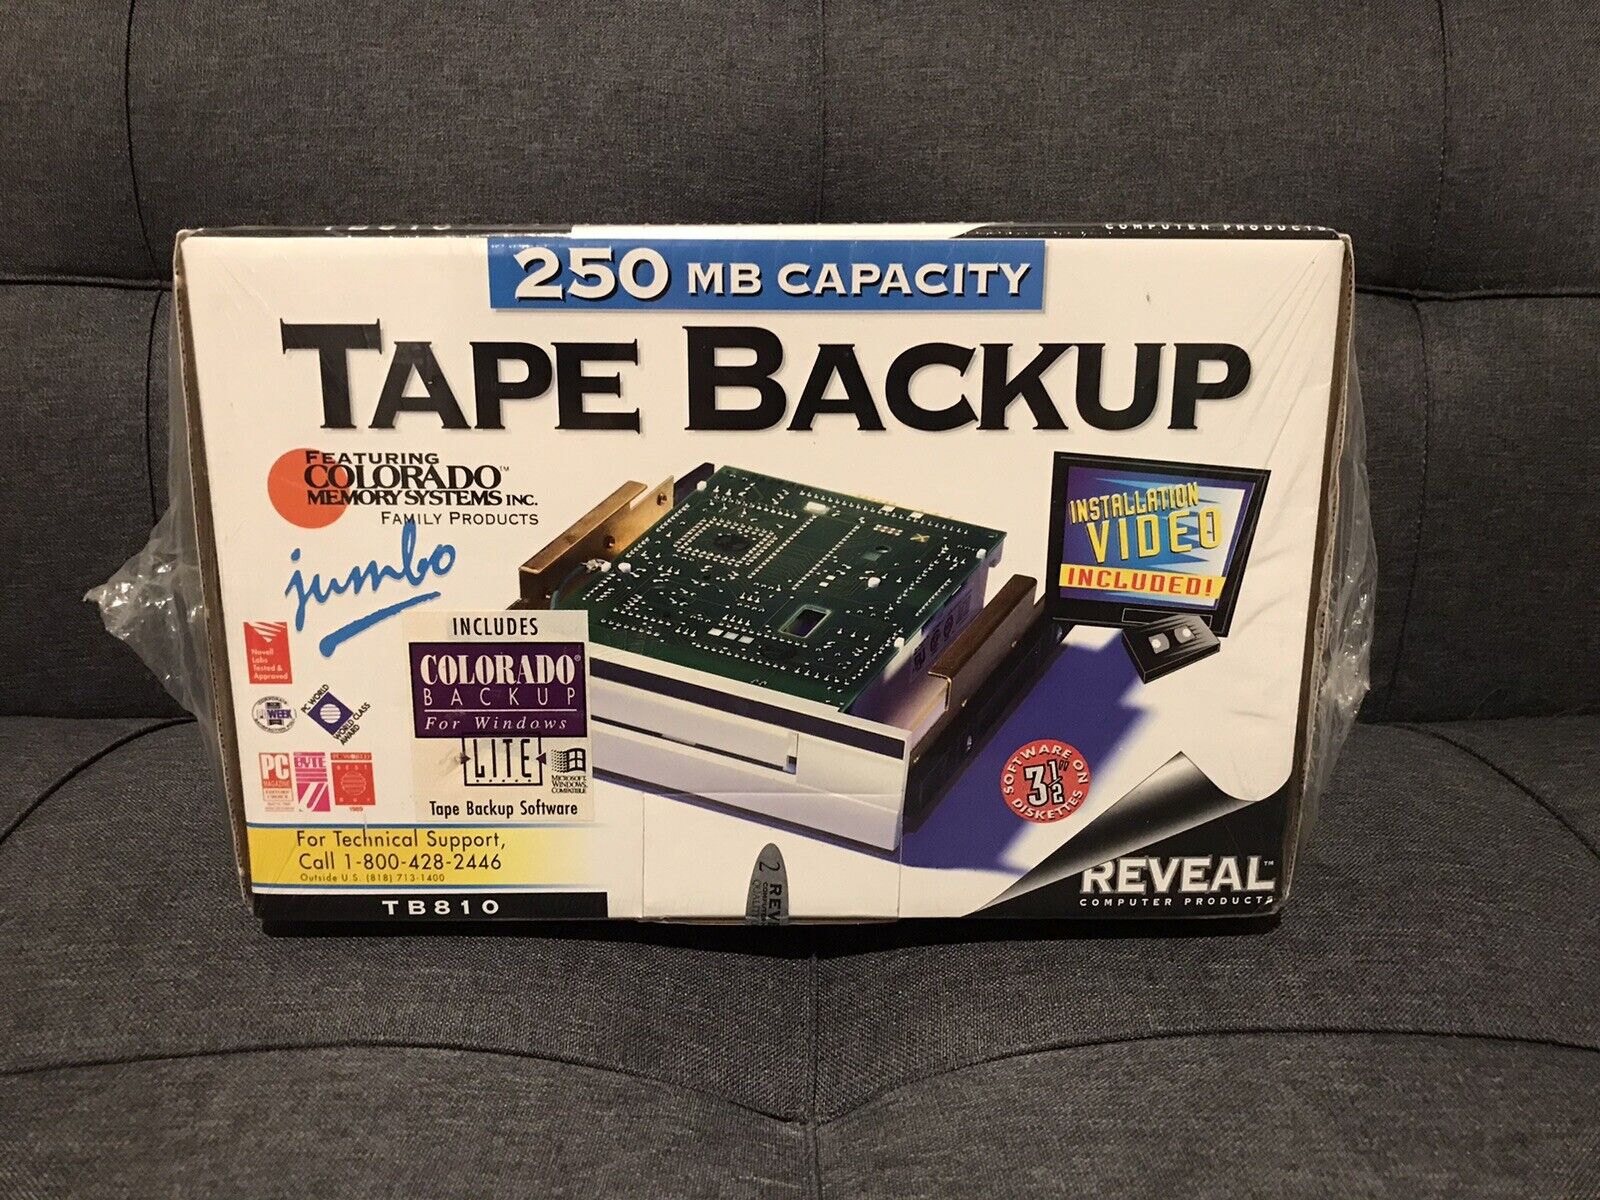 Reveal Tape Back-up 250 MB Capacity Rare TB 810